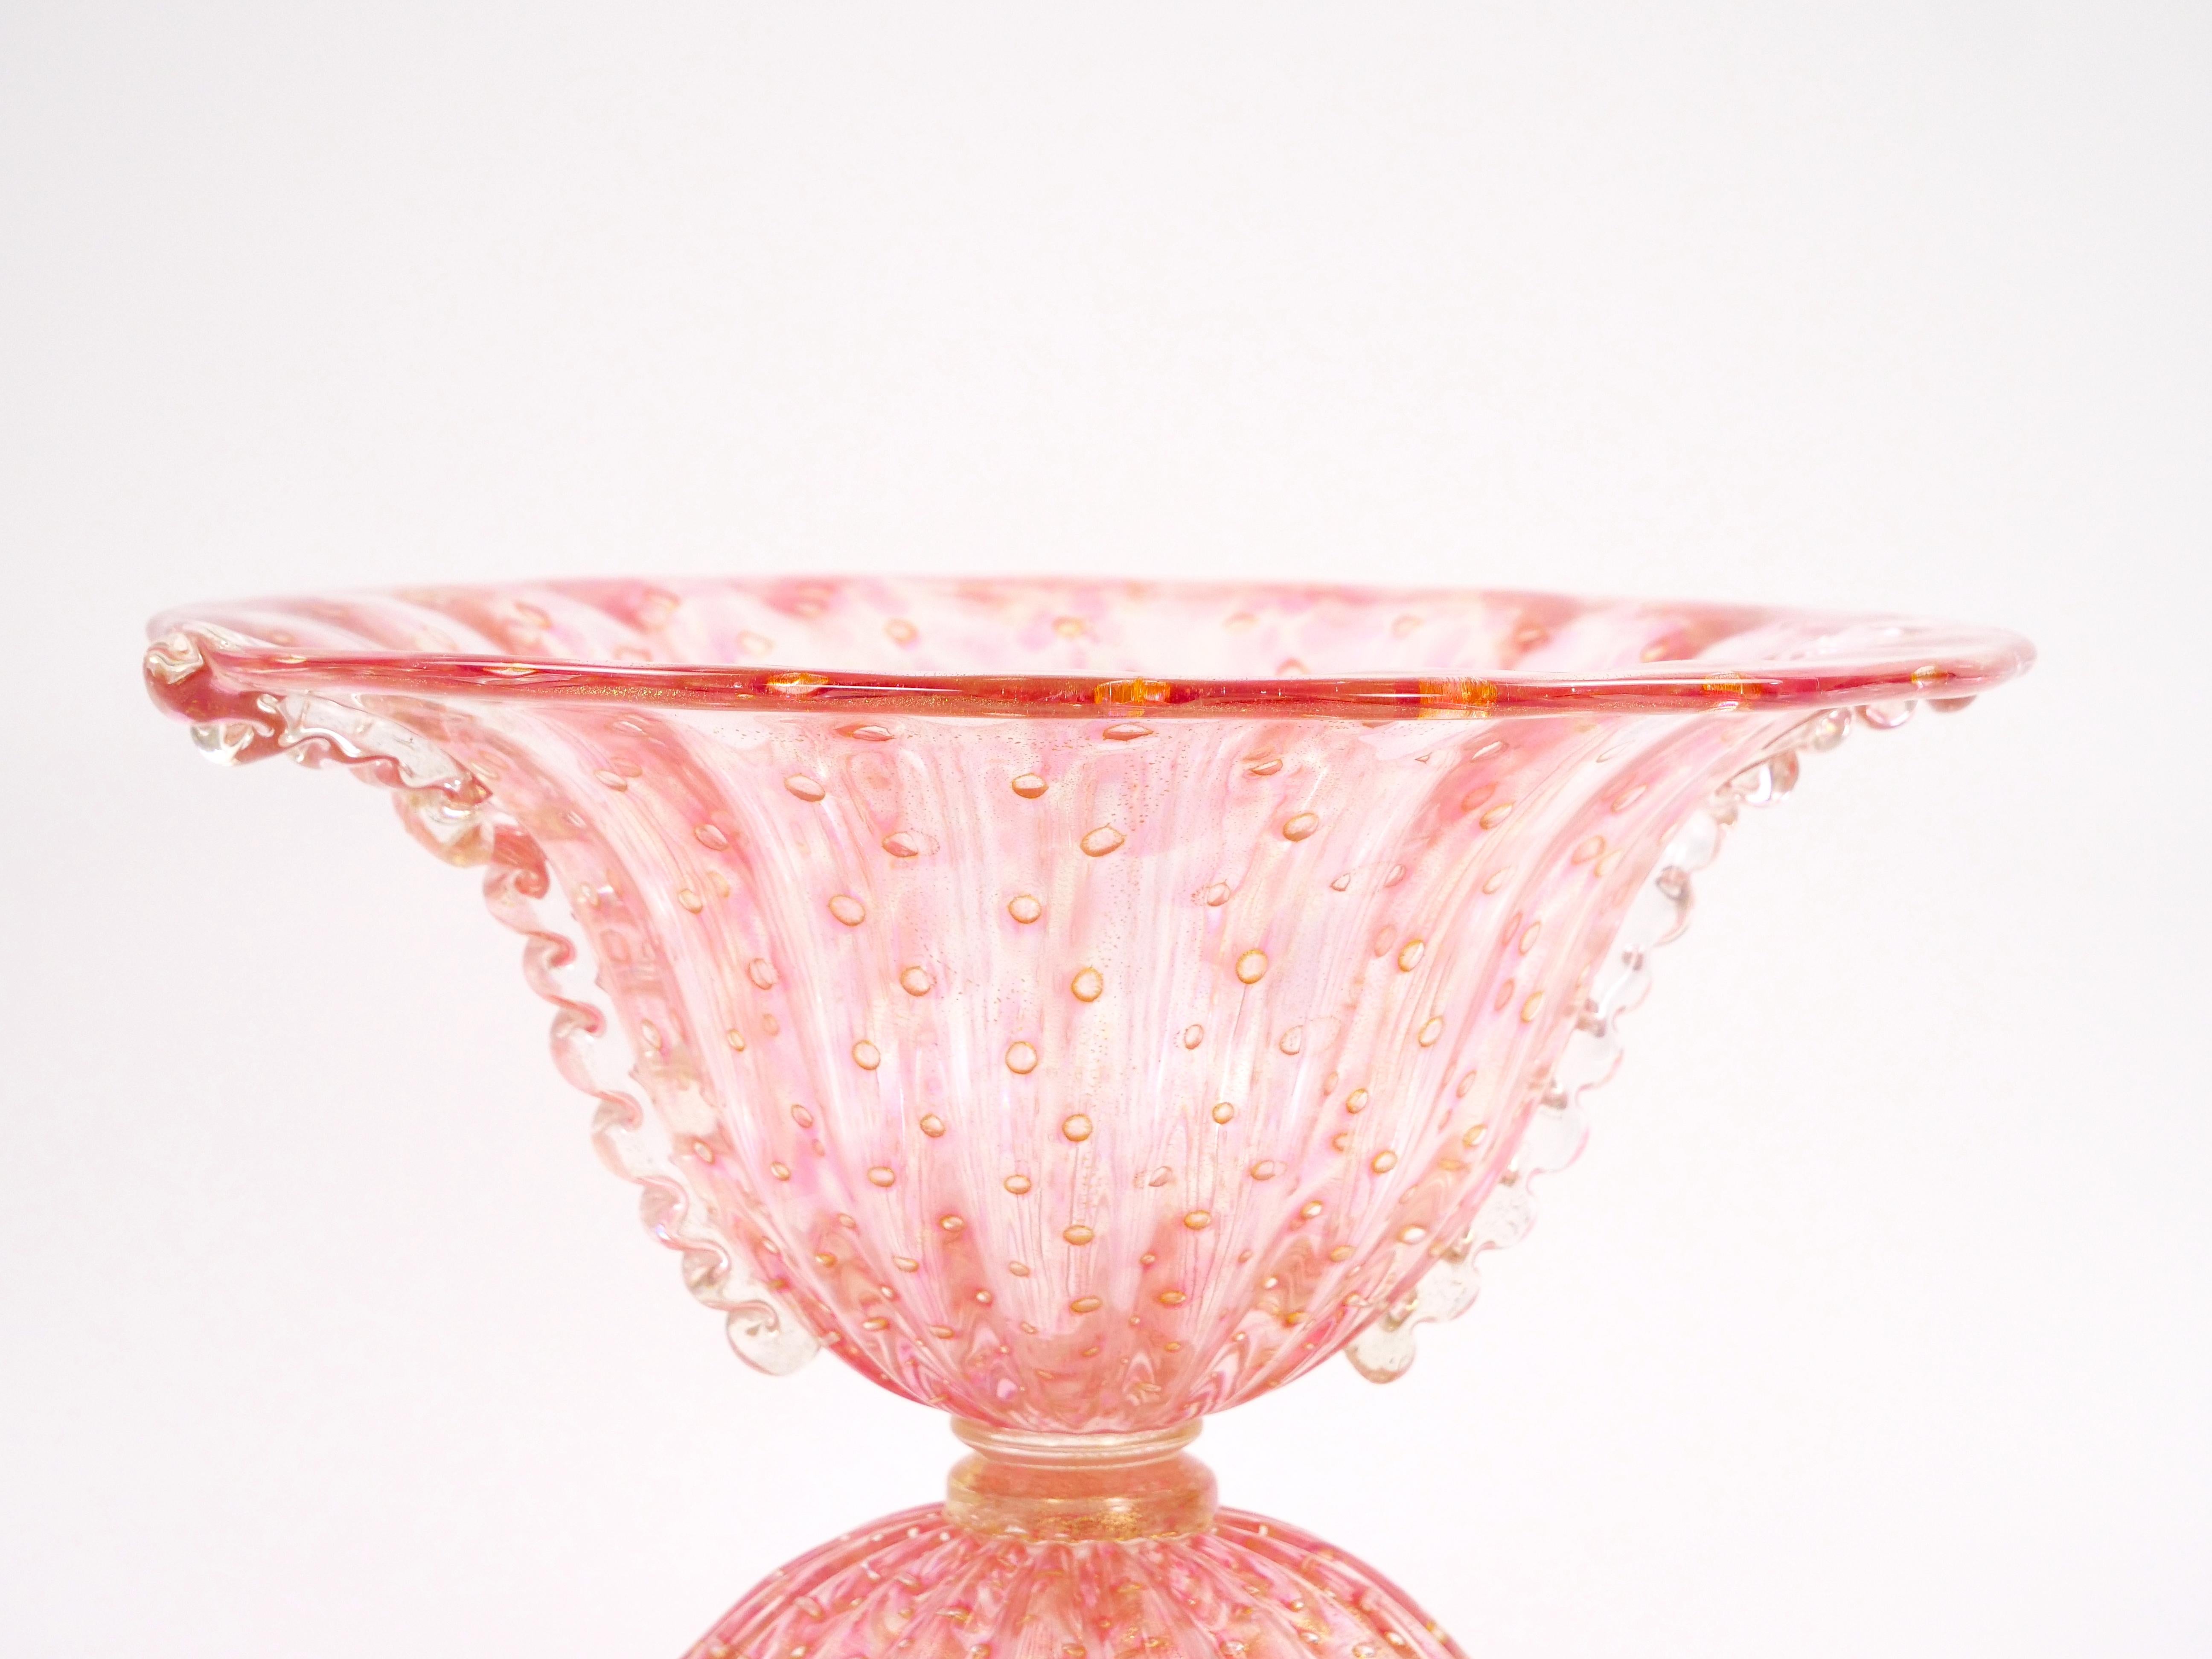 Hand-Crafted Murano Bullicante / Gold Infused Rose Colored Glass Tableware Centerpiece Bowl For Sale